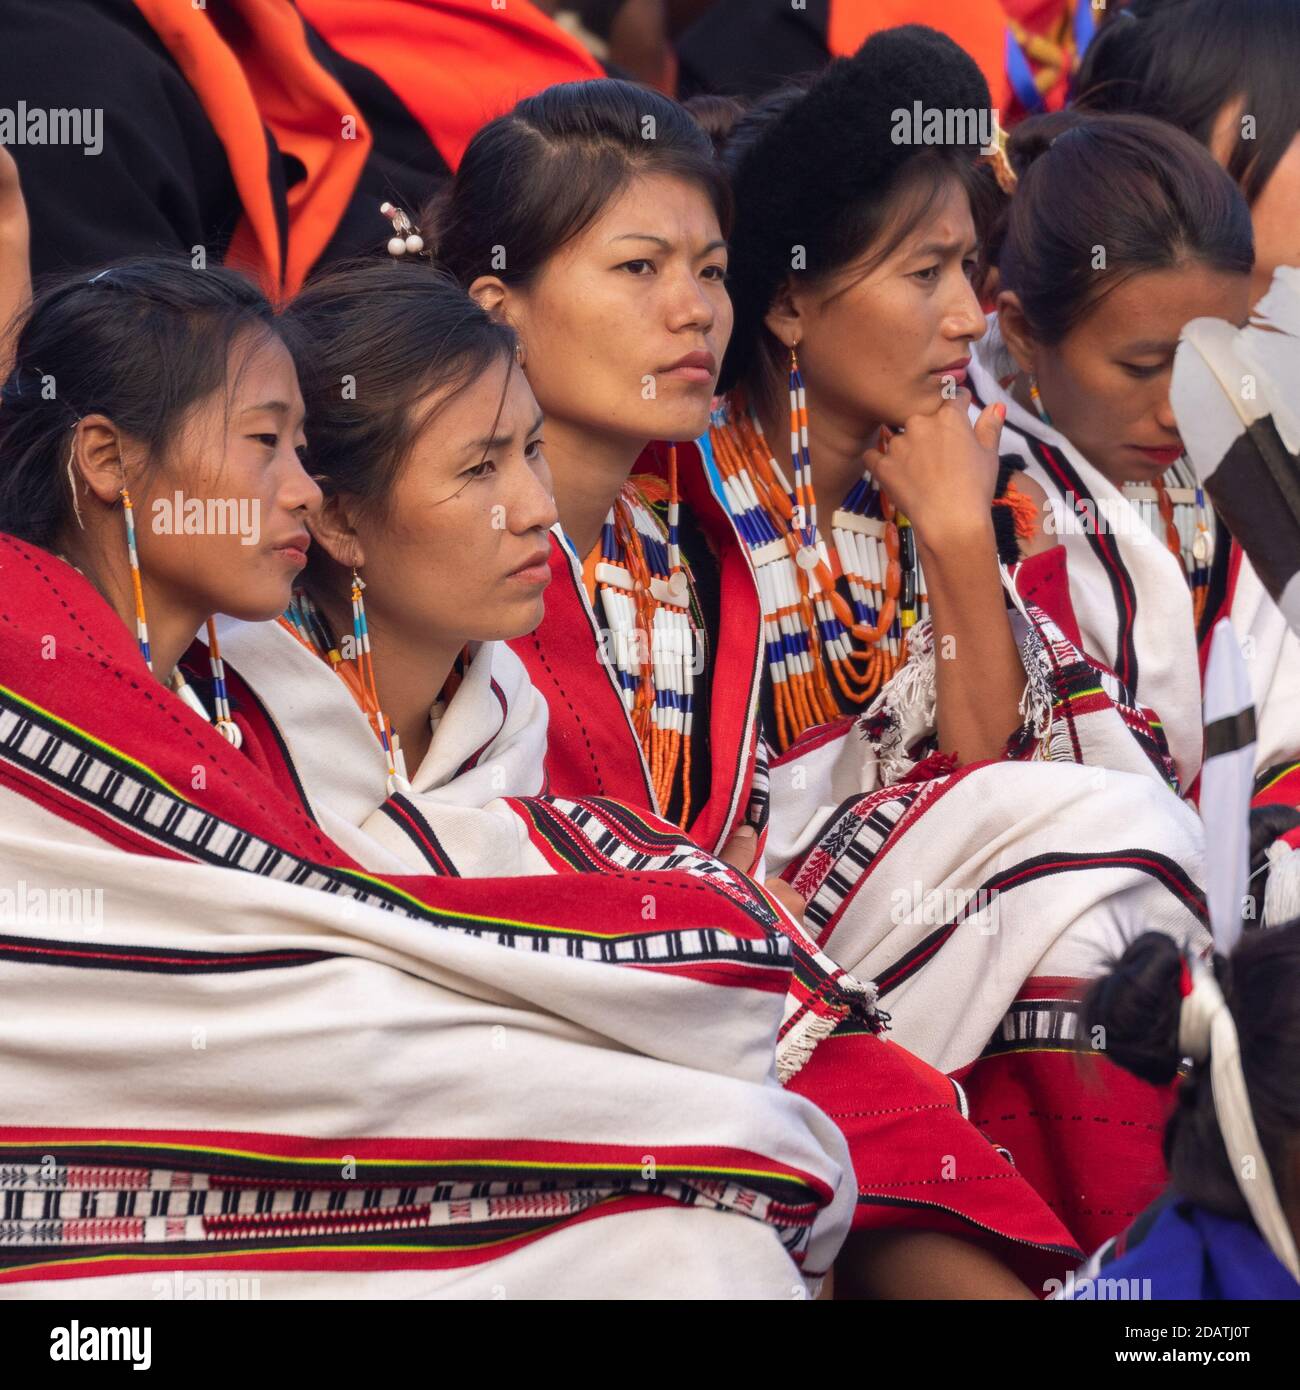 Young Naga tribeswomen siting together wearing colorful attire and shawls in Kisama Heritage village in Nagaland India on 3 December 2016 Stock Photo